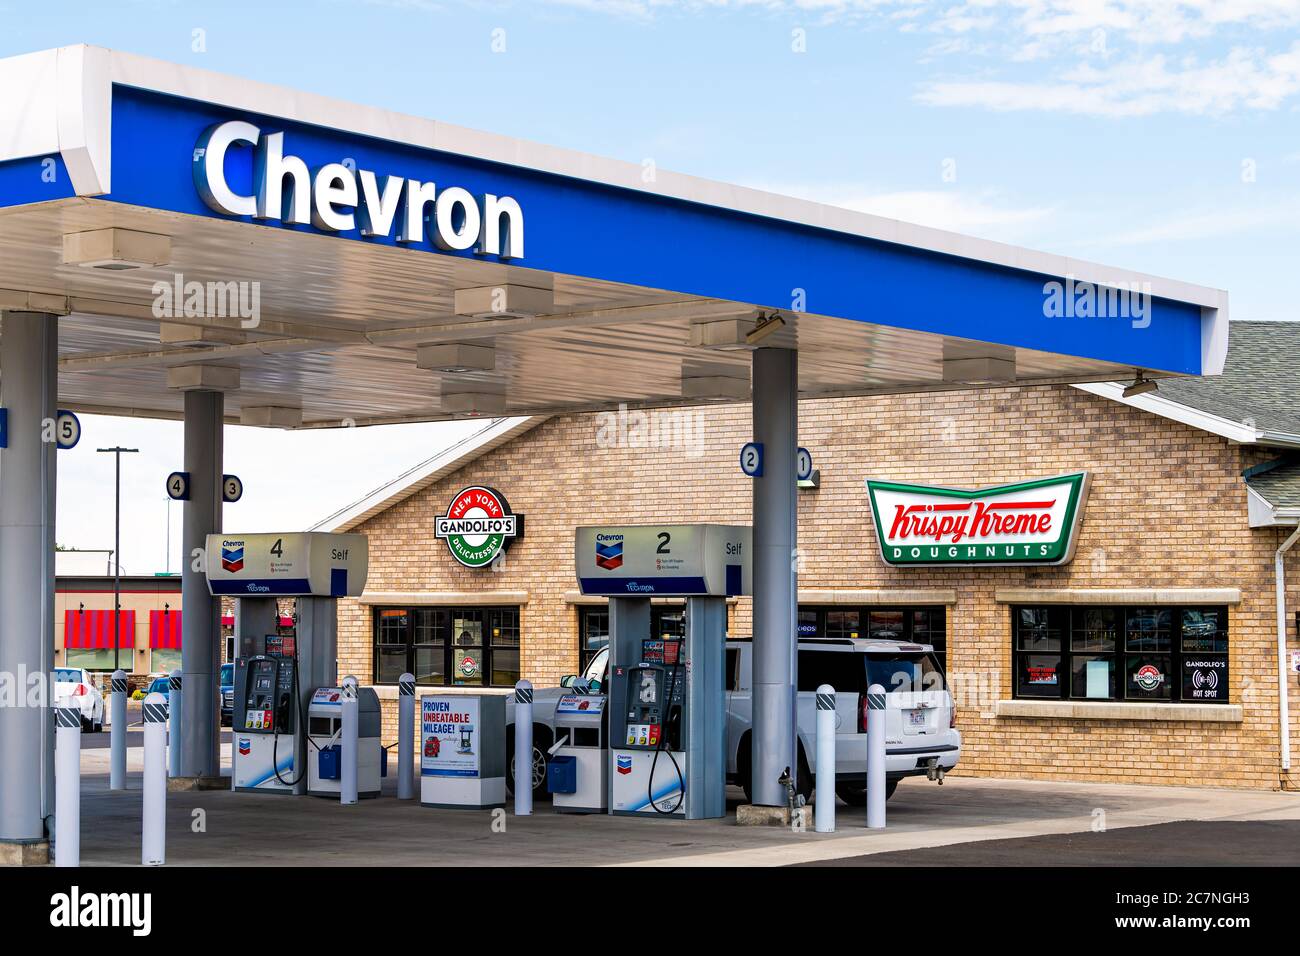 Spanish Fork Usa - July 29 2019 Krispy Kreme Doughnuts Fast Food Donut Chain Business Facade Exterior Entrance Sign In Utah By Chevron Gas Station Stock Photo - Alamy